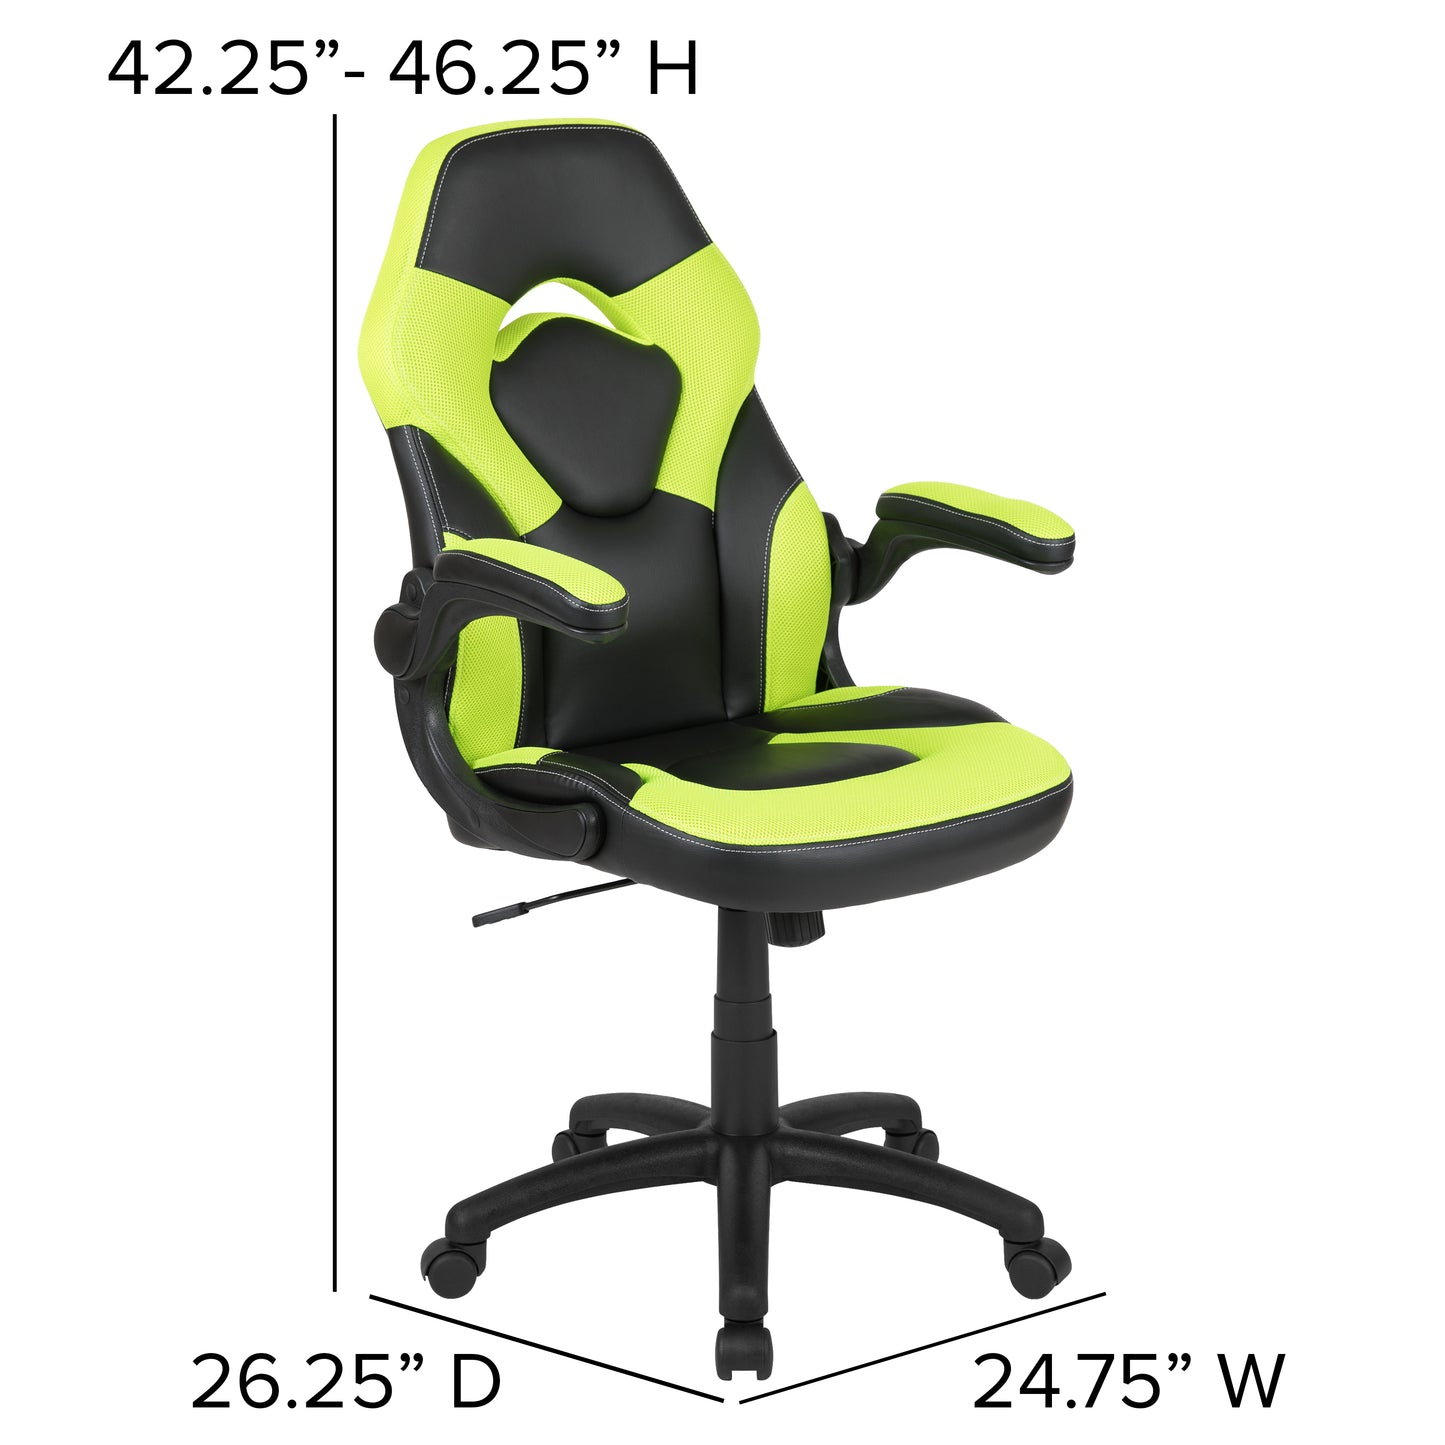 Optis Gaming Desk With Yellow Chair